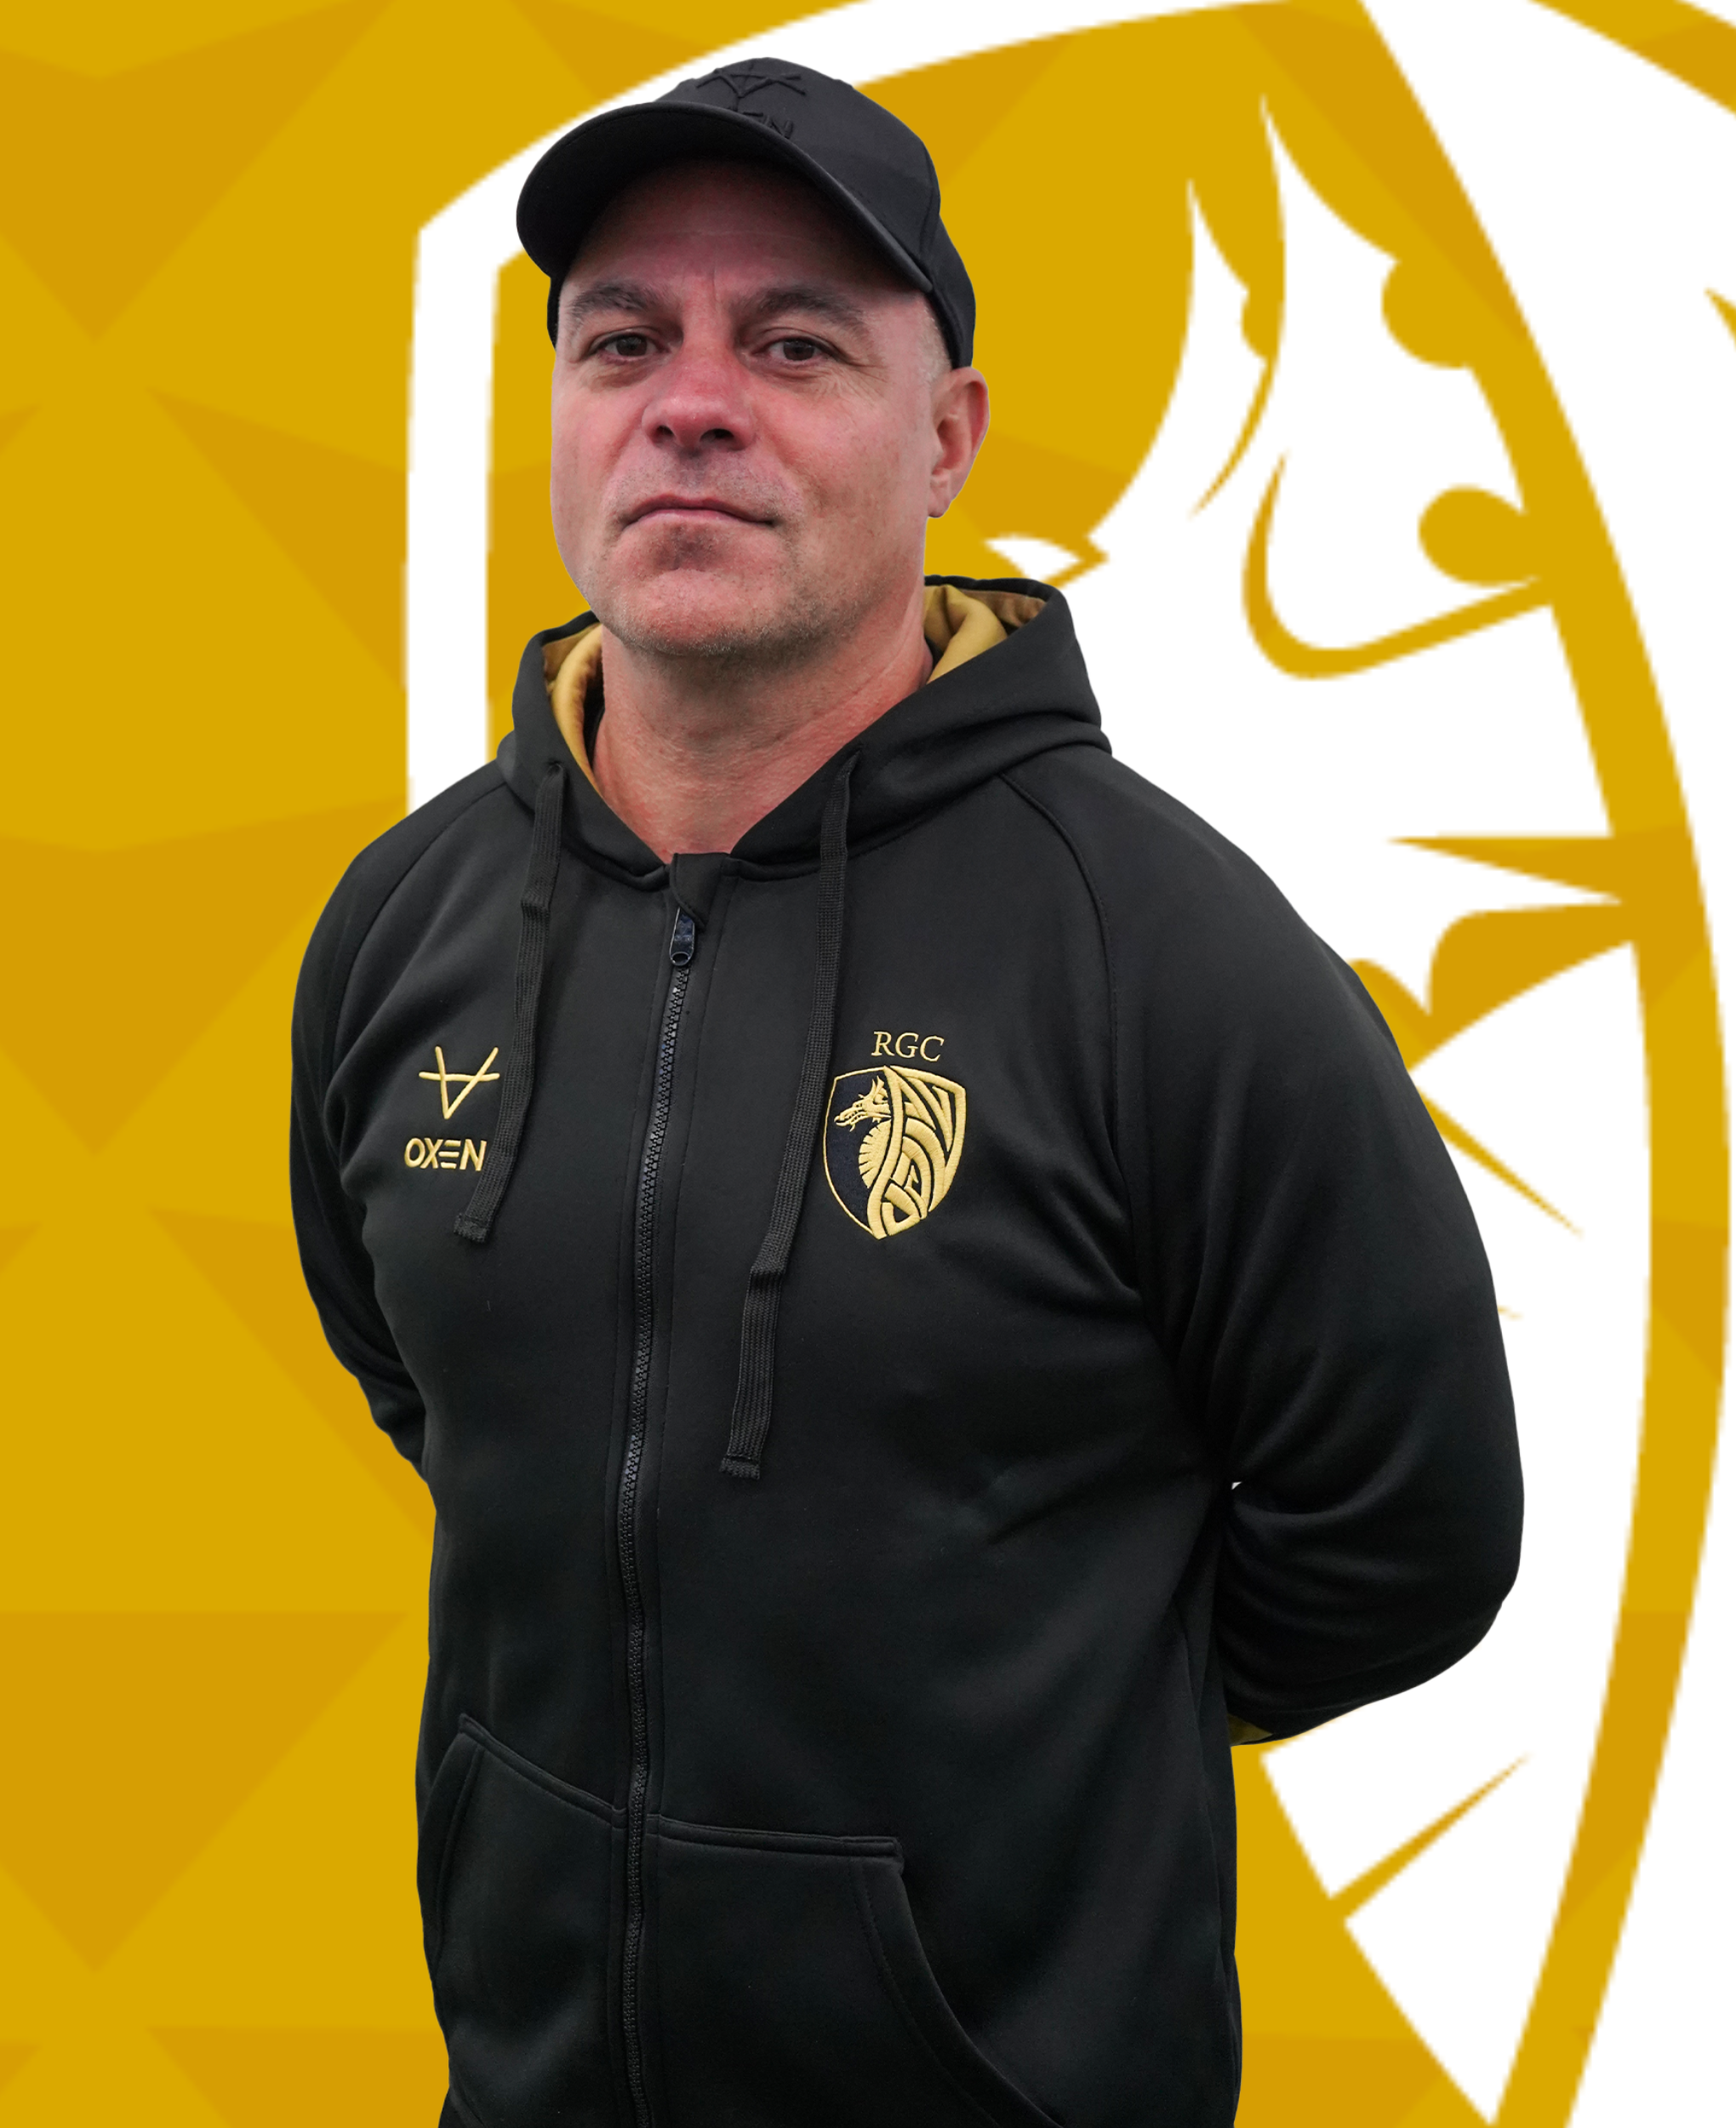 New RGC U16s Head Coach Appointed